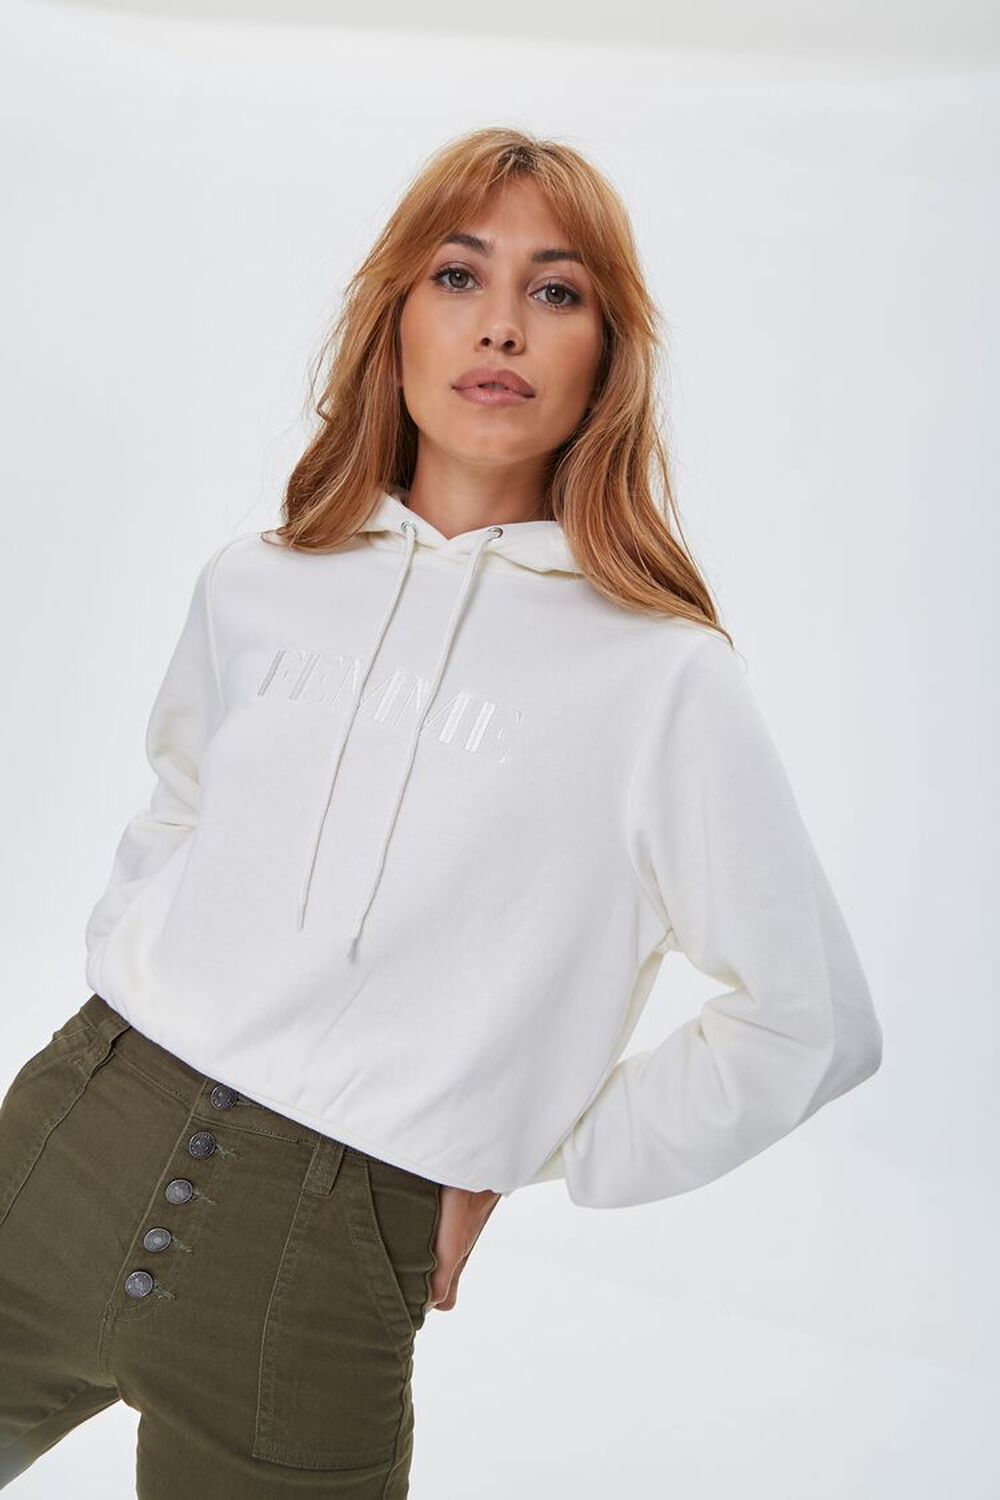 CREAM Femme Embroidered Hoodie, image 1